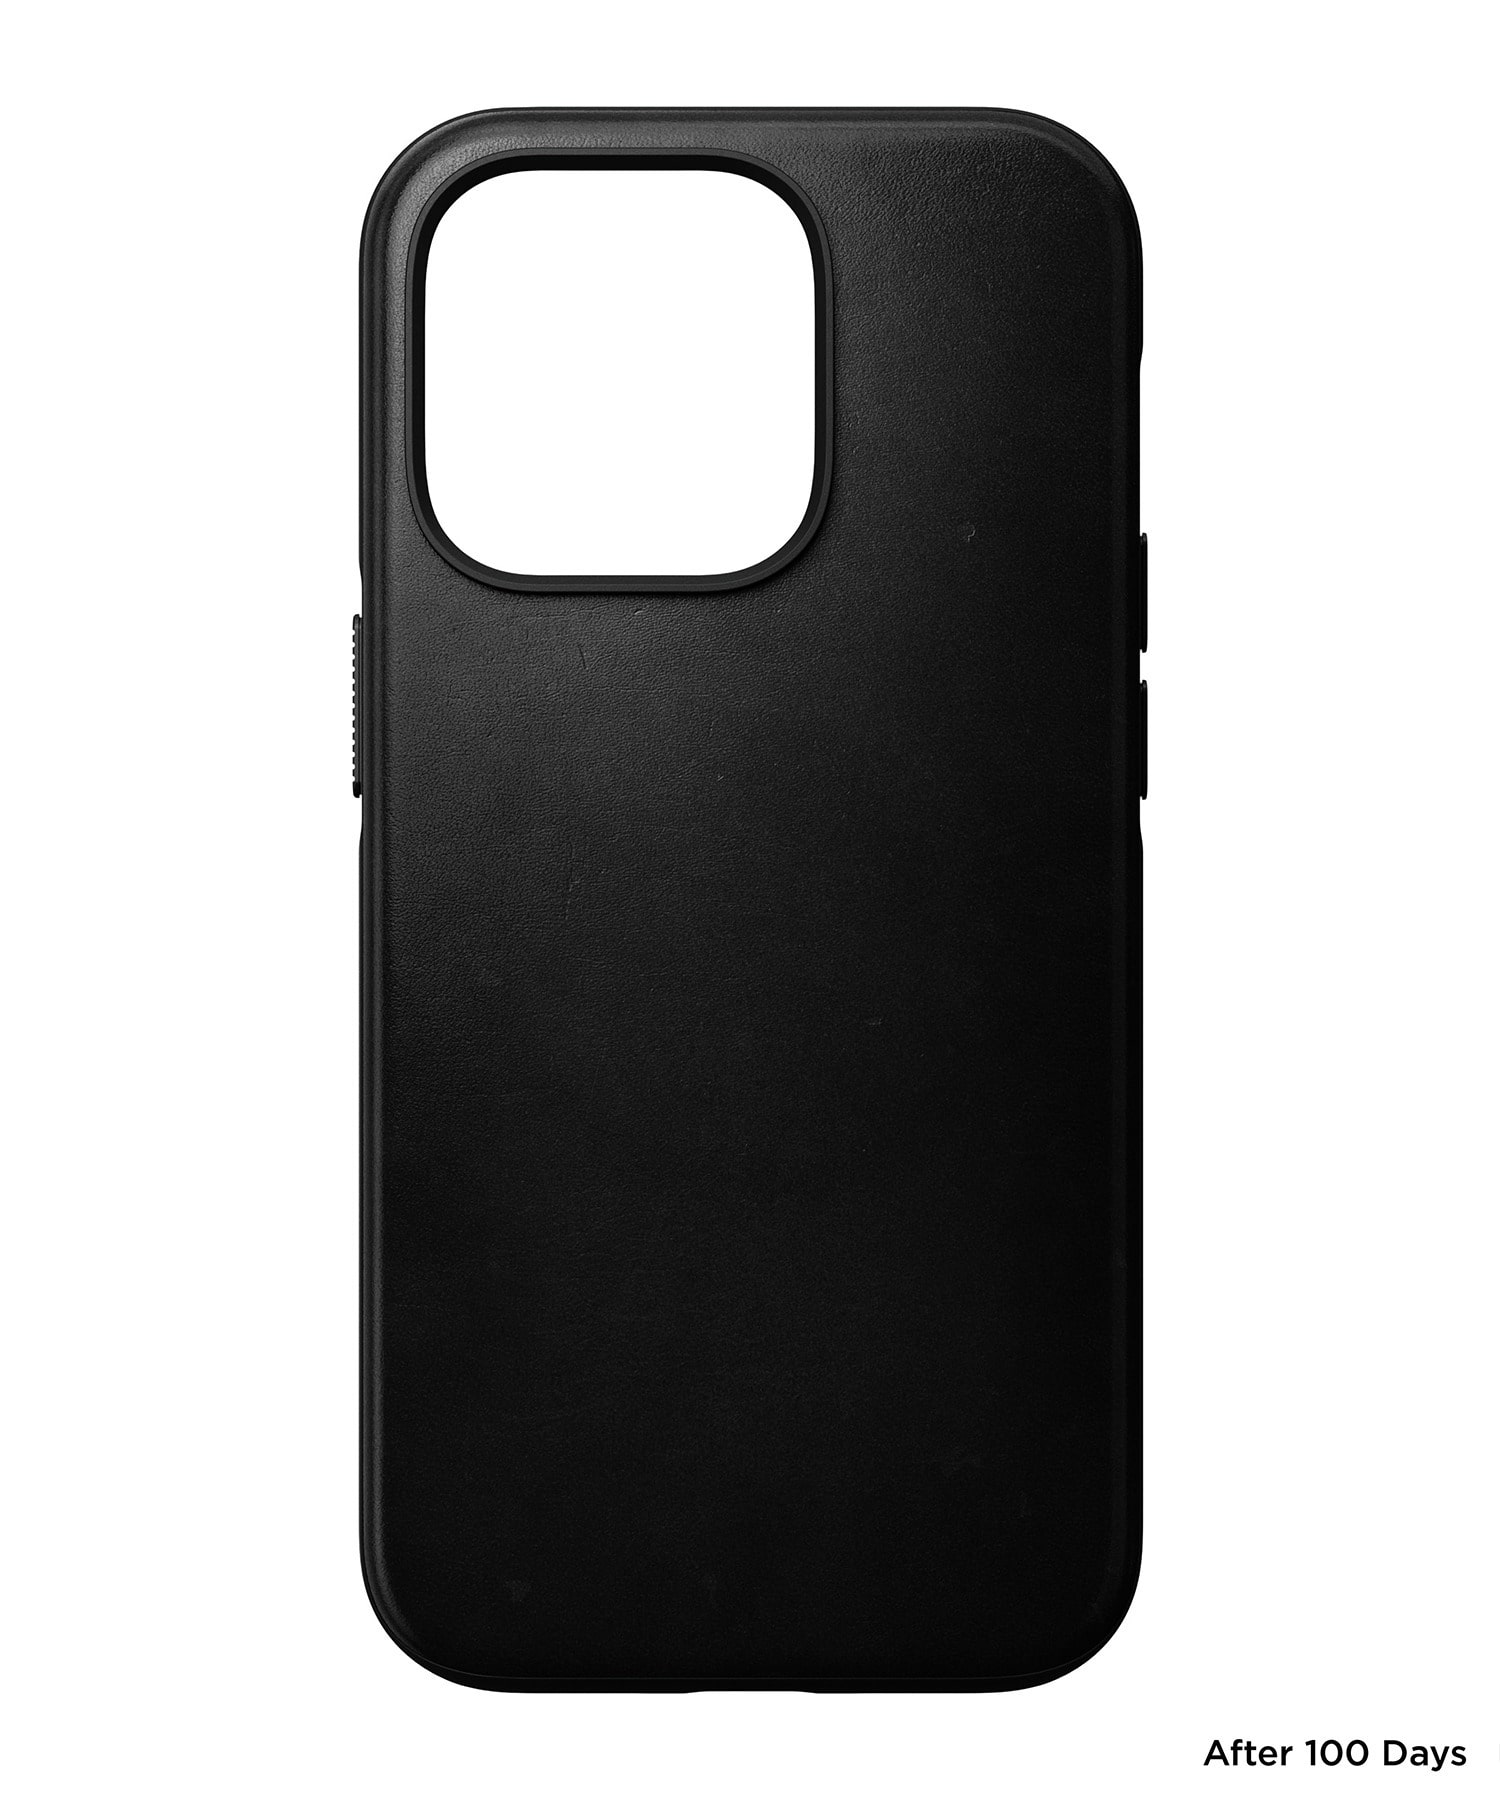 NOMAD MODER LEATHER CASE iPhone14PROケース